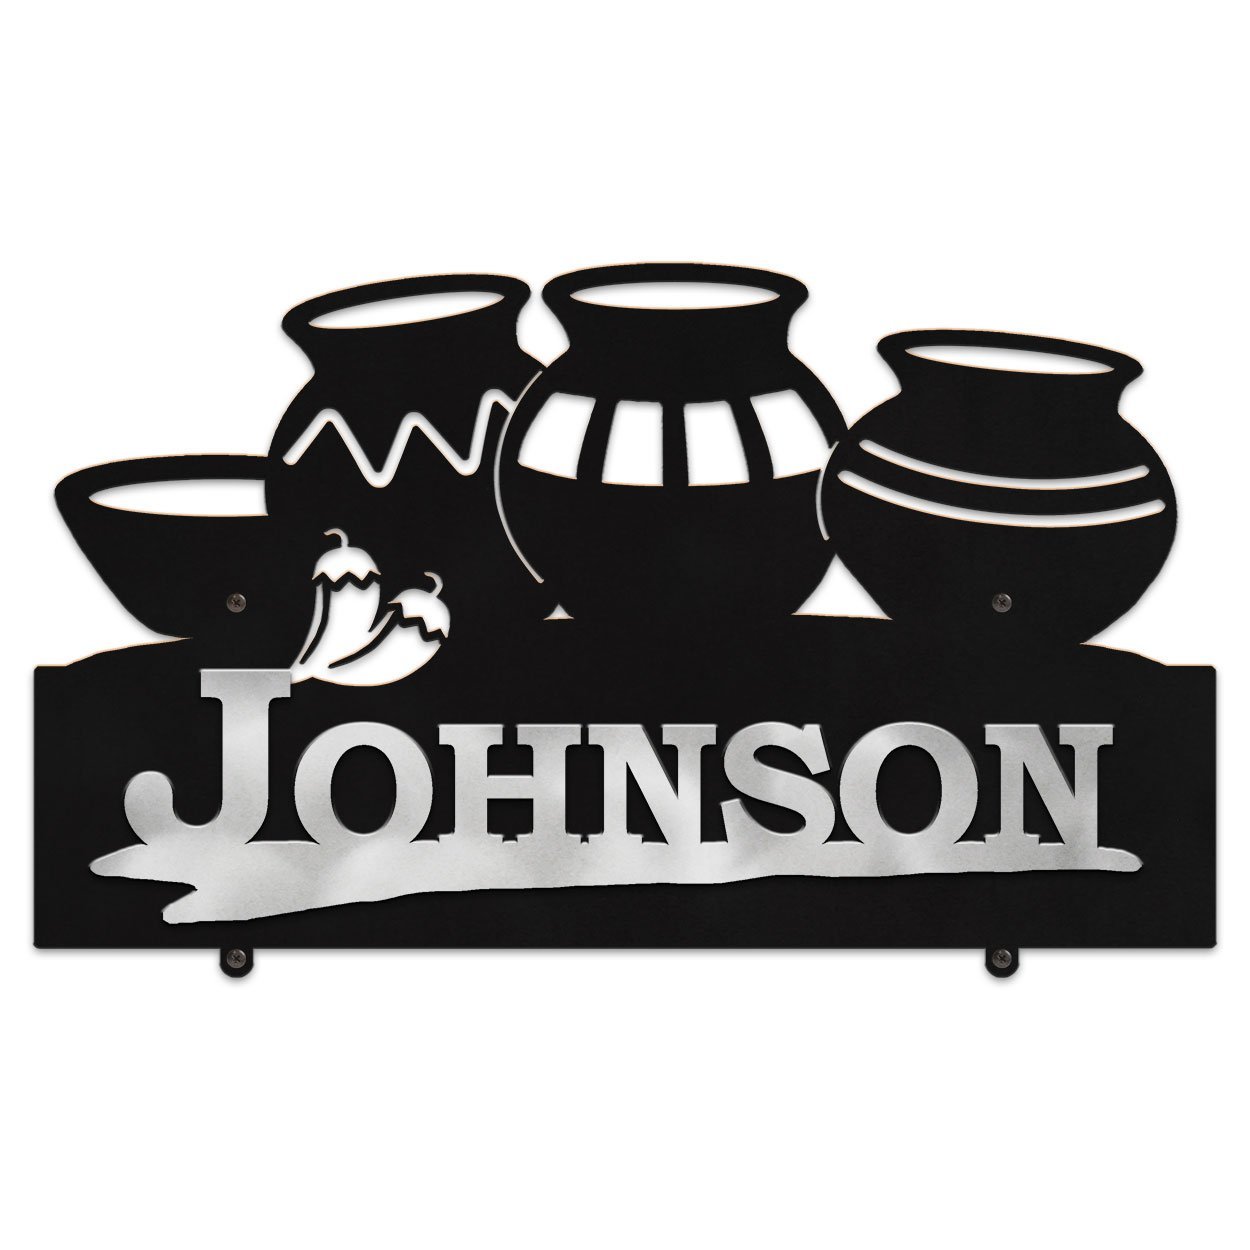 607057 - Four Pots with Chilies Design Horizontal Metal Custom Name Wall Plaque